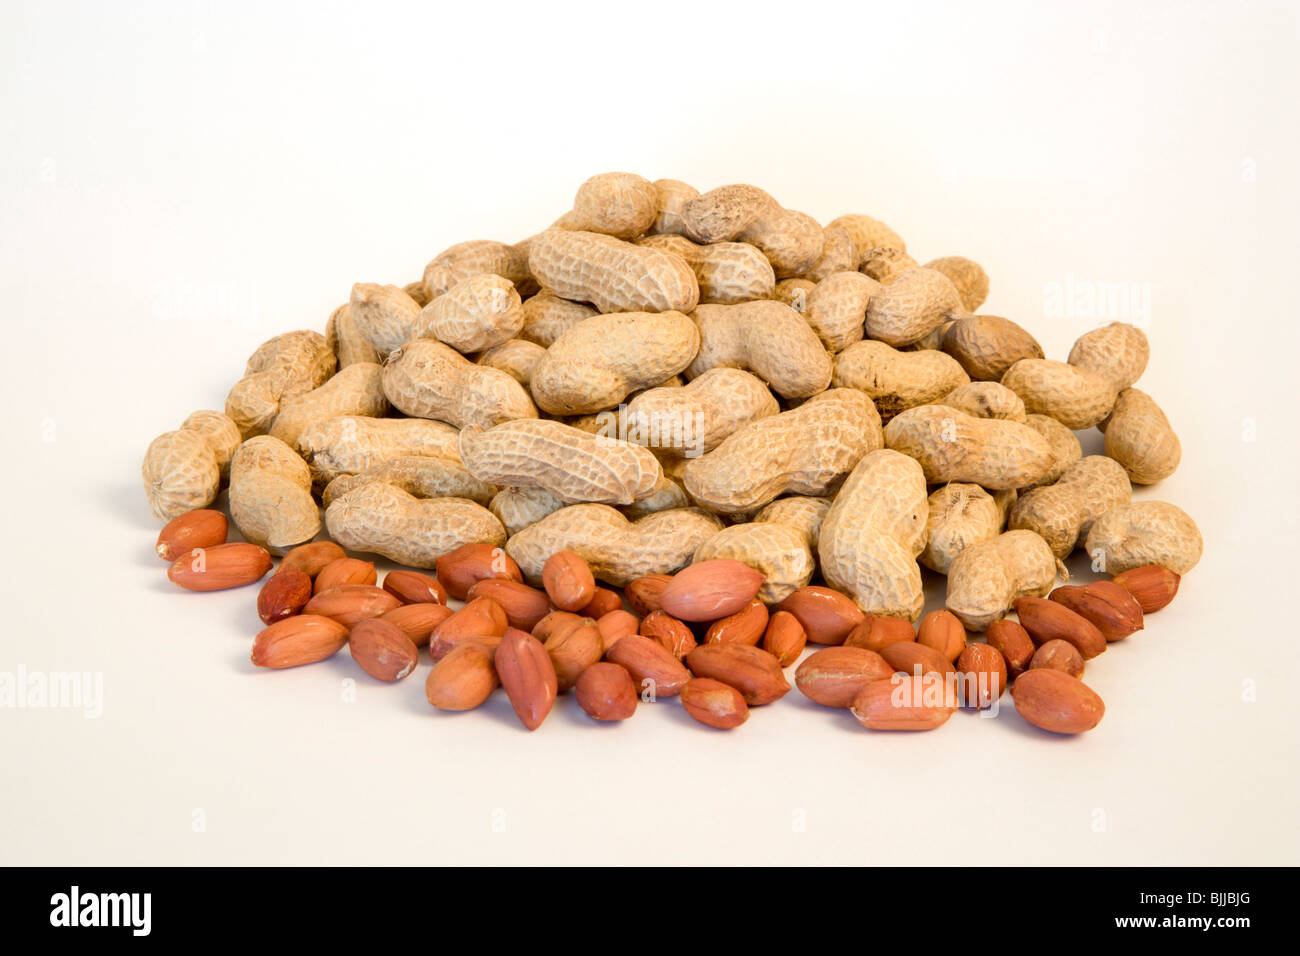 USA, Food, Nuts, Groundnuts Peanuts and kernels on a white background. Stock Photo